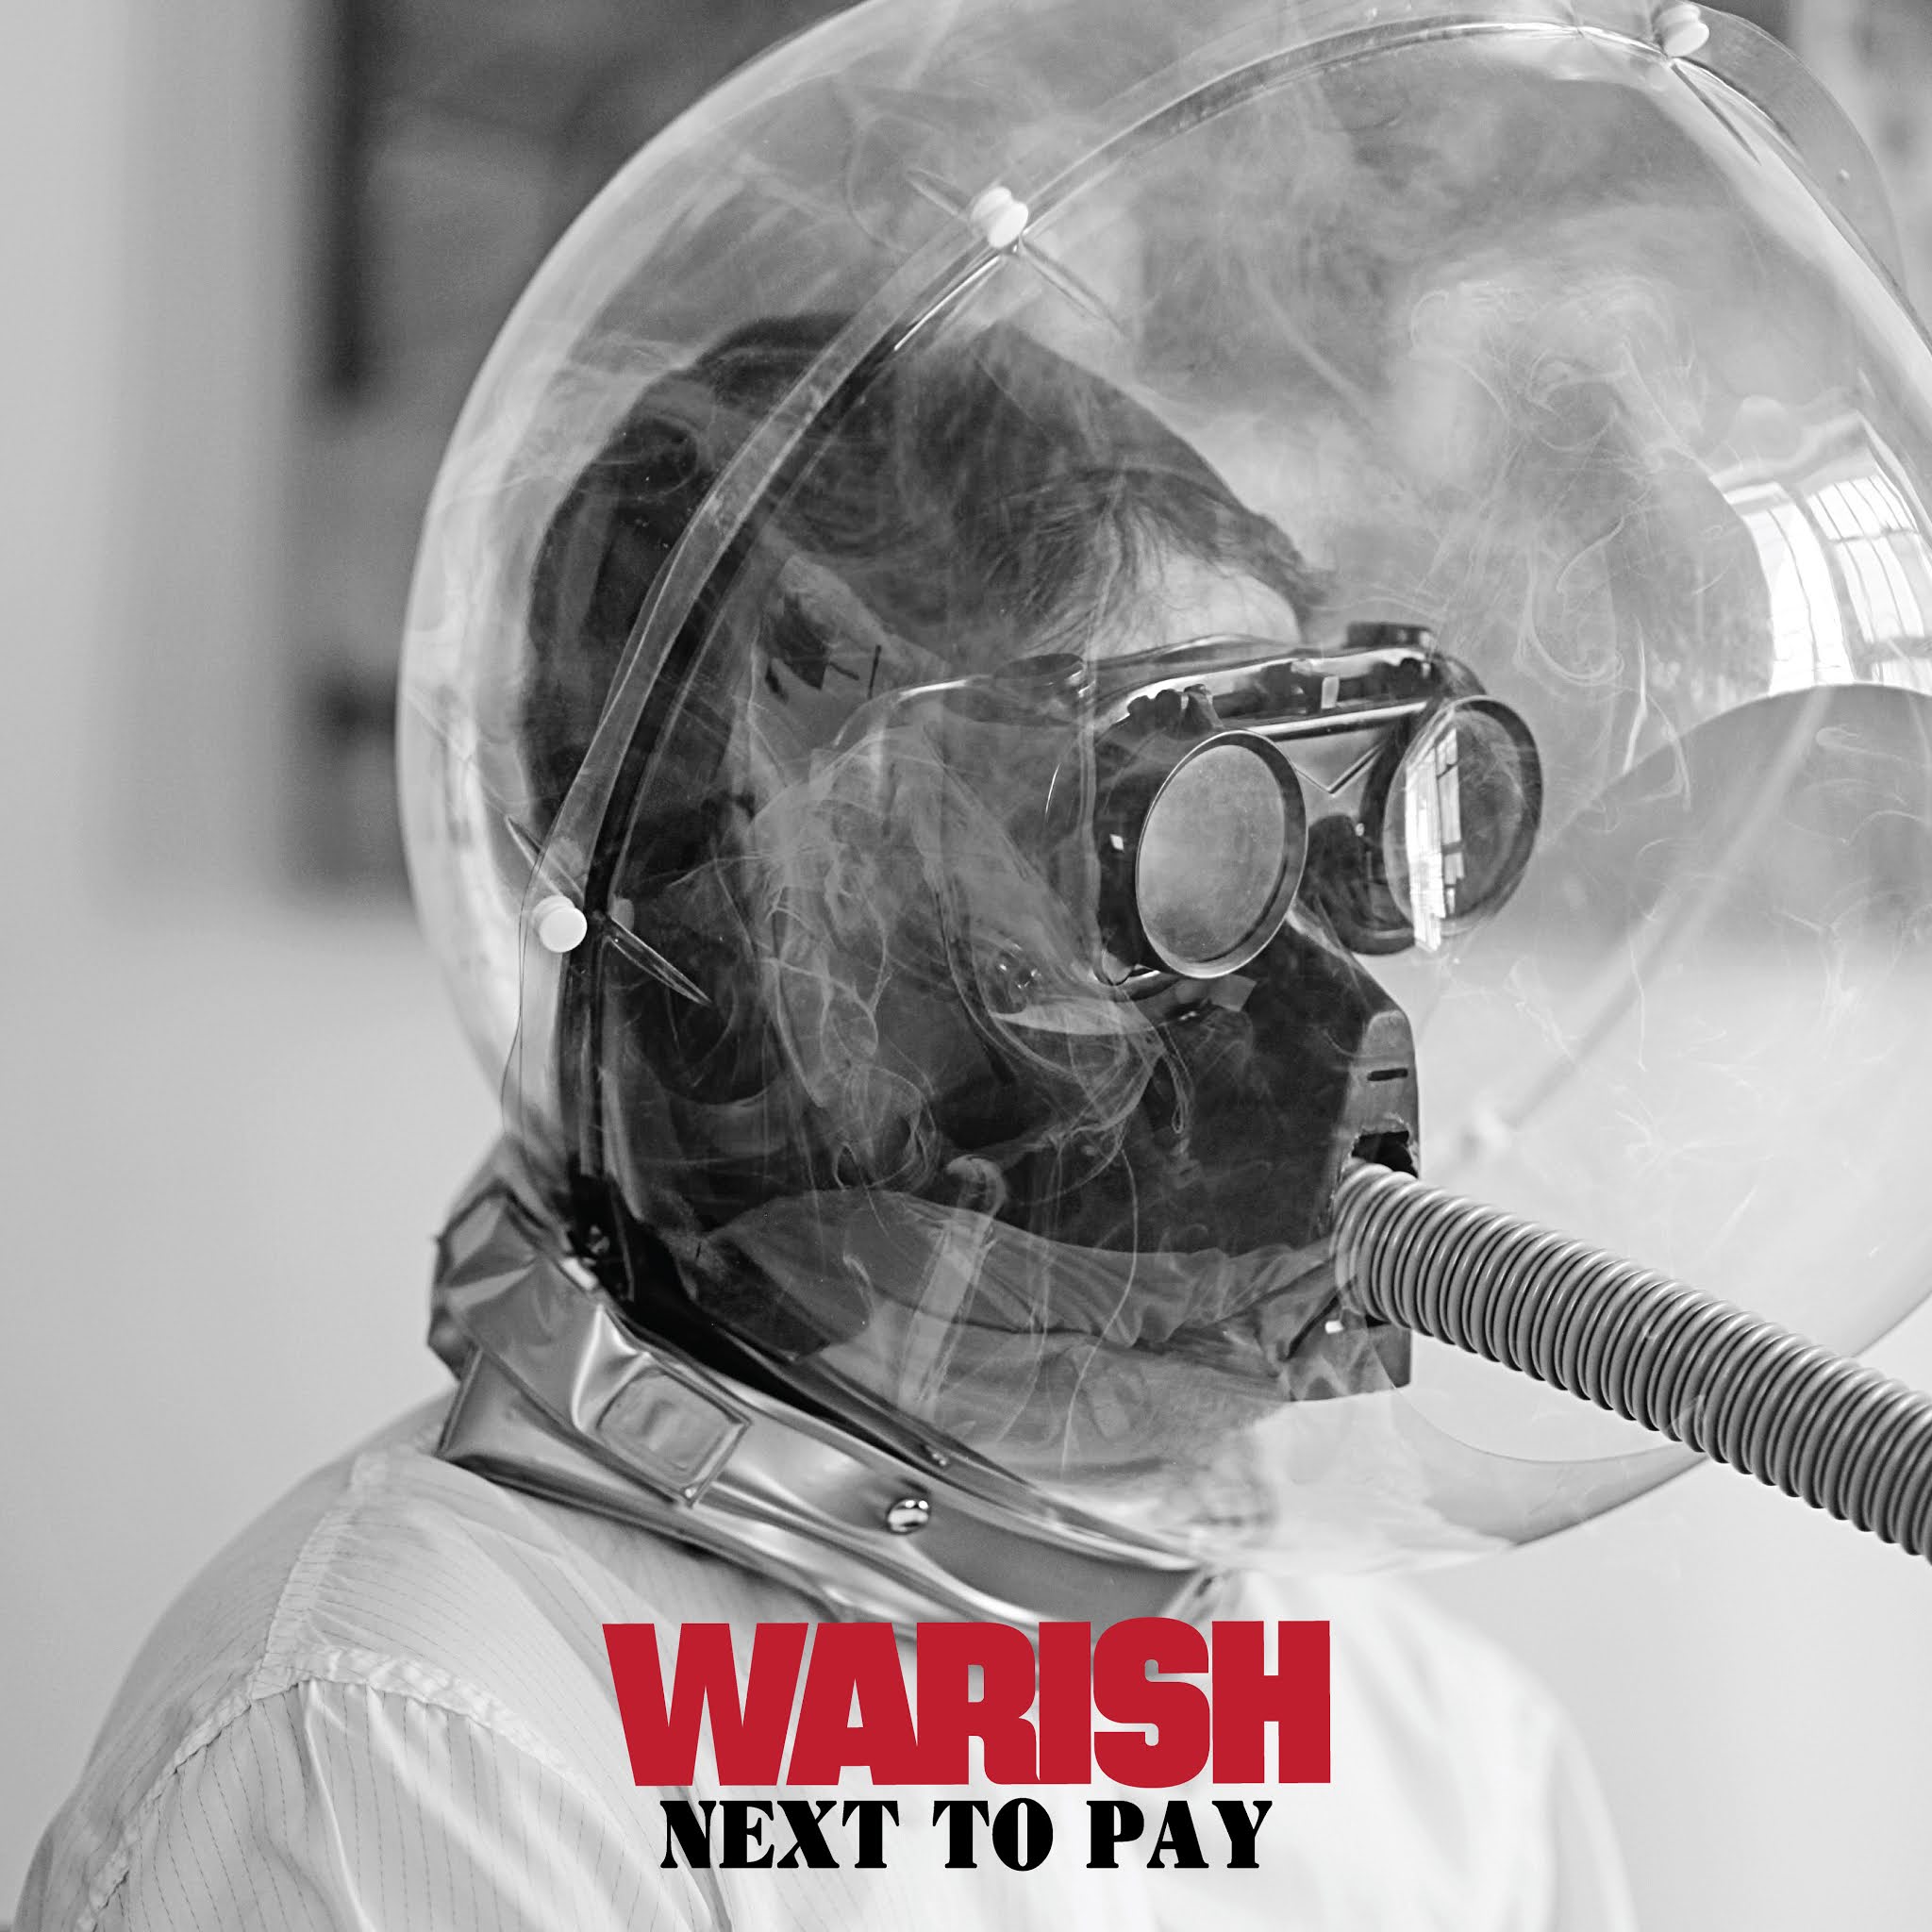 WARISH (featuring Riley Hawk) streaming forthcoming album early